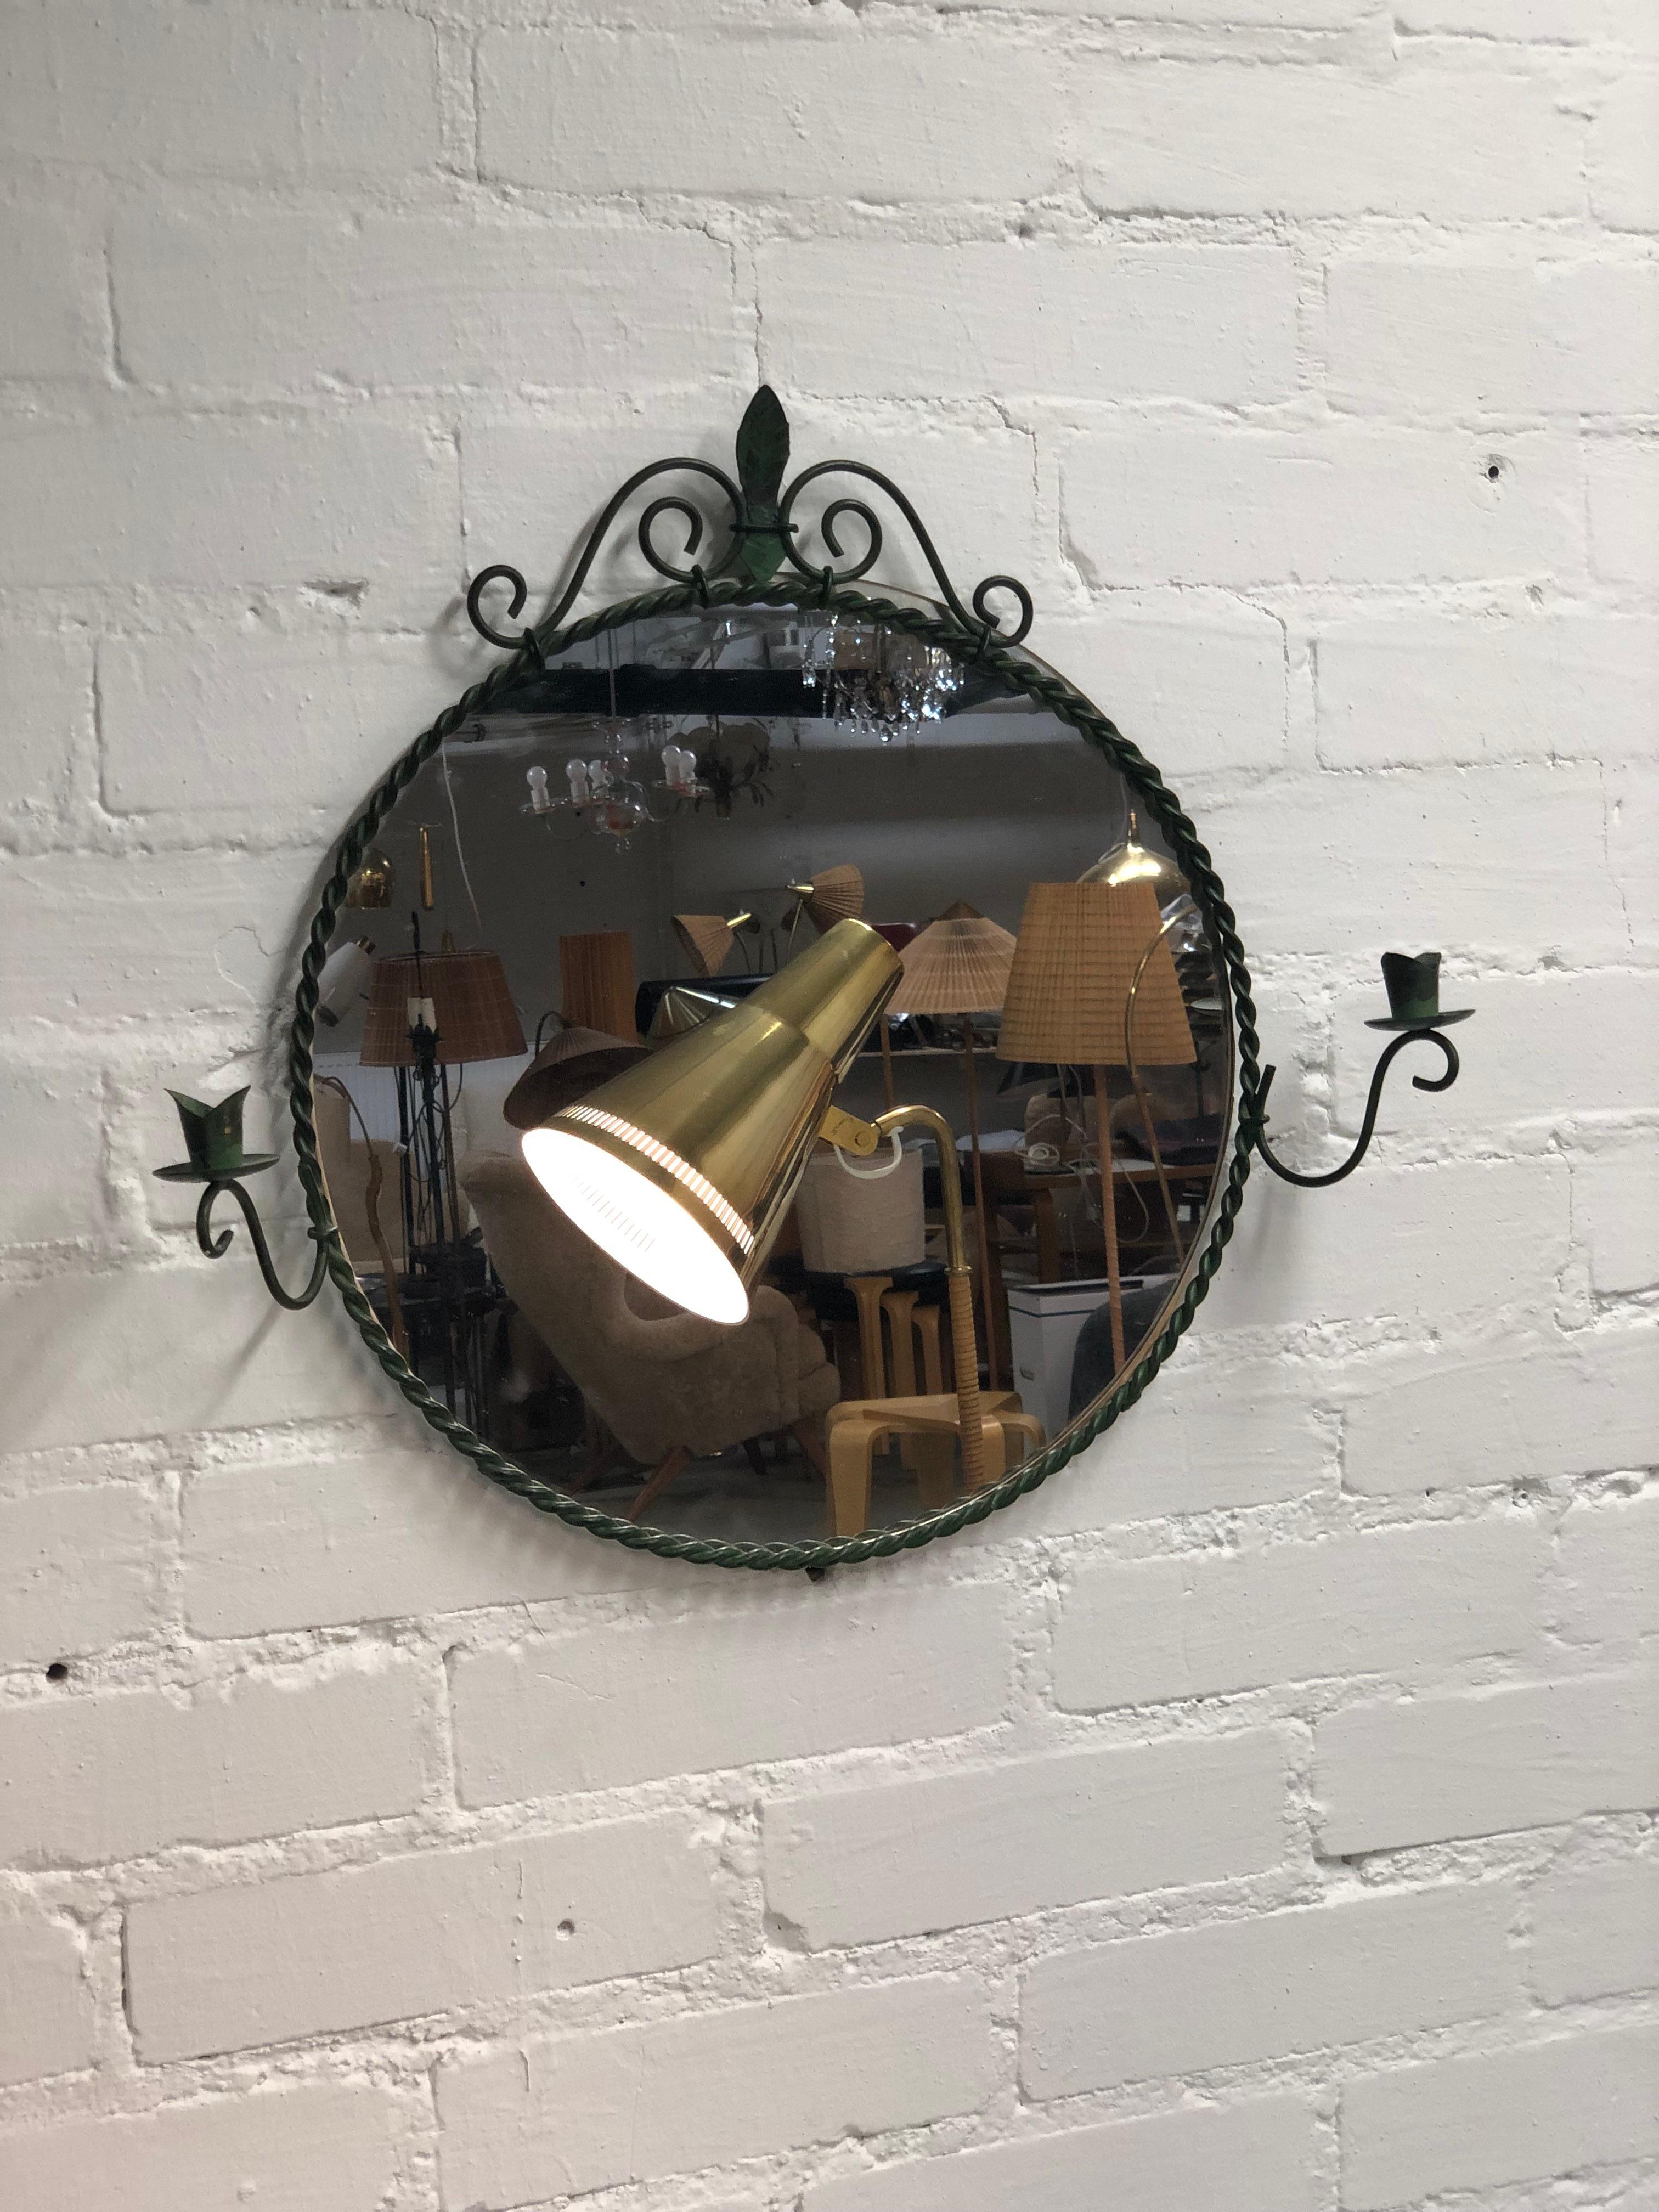 A beautiful wall mirror in solid iron designed by Antti Hakkarainen and manufactured by Taidetakomo Hakkarainen in the 1930s. The mirror is in great original condition with a beautiful greenish patina. Antti Hakkarainen was well known for his